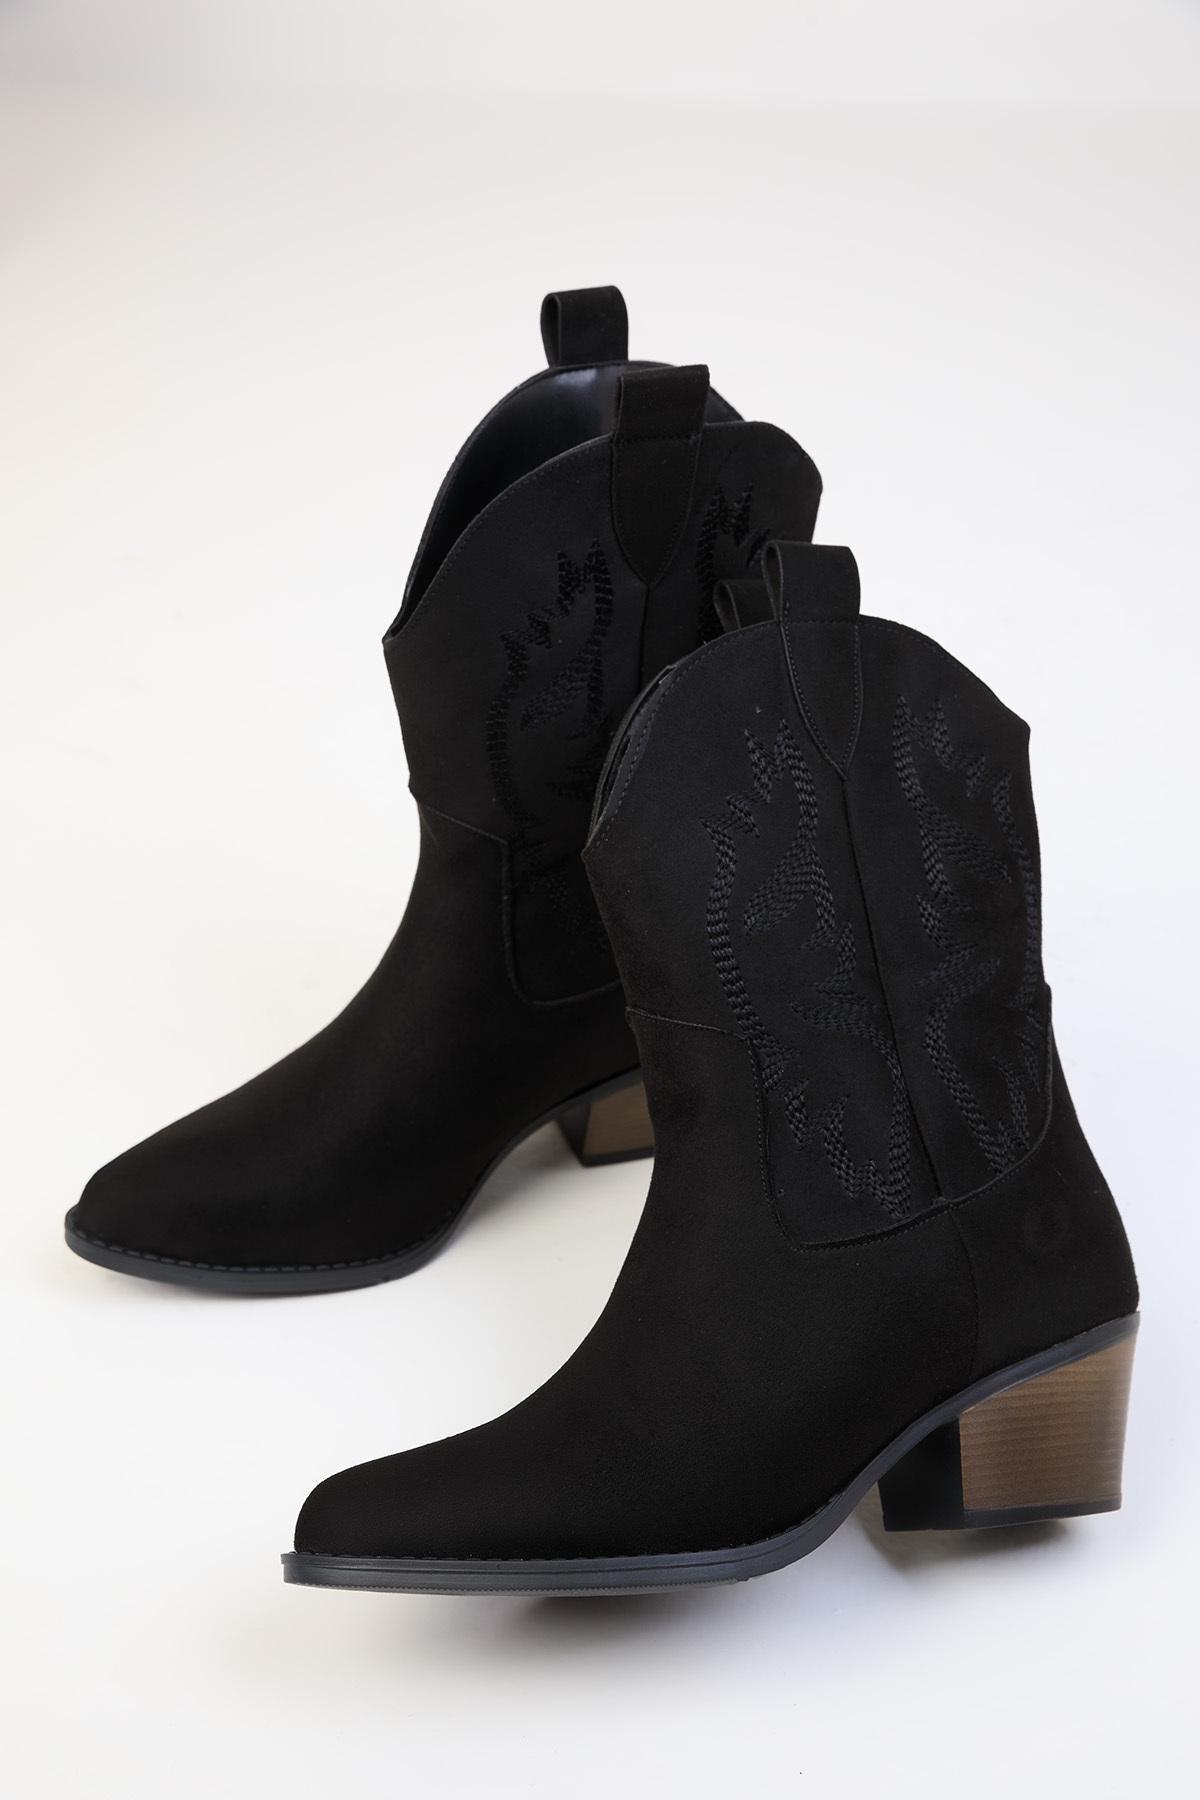 SOHO - Black Embroidered Suede Boots